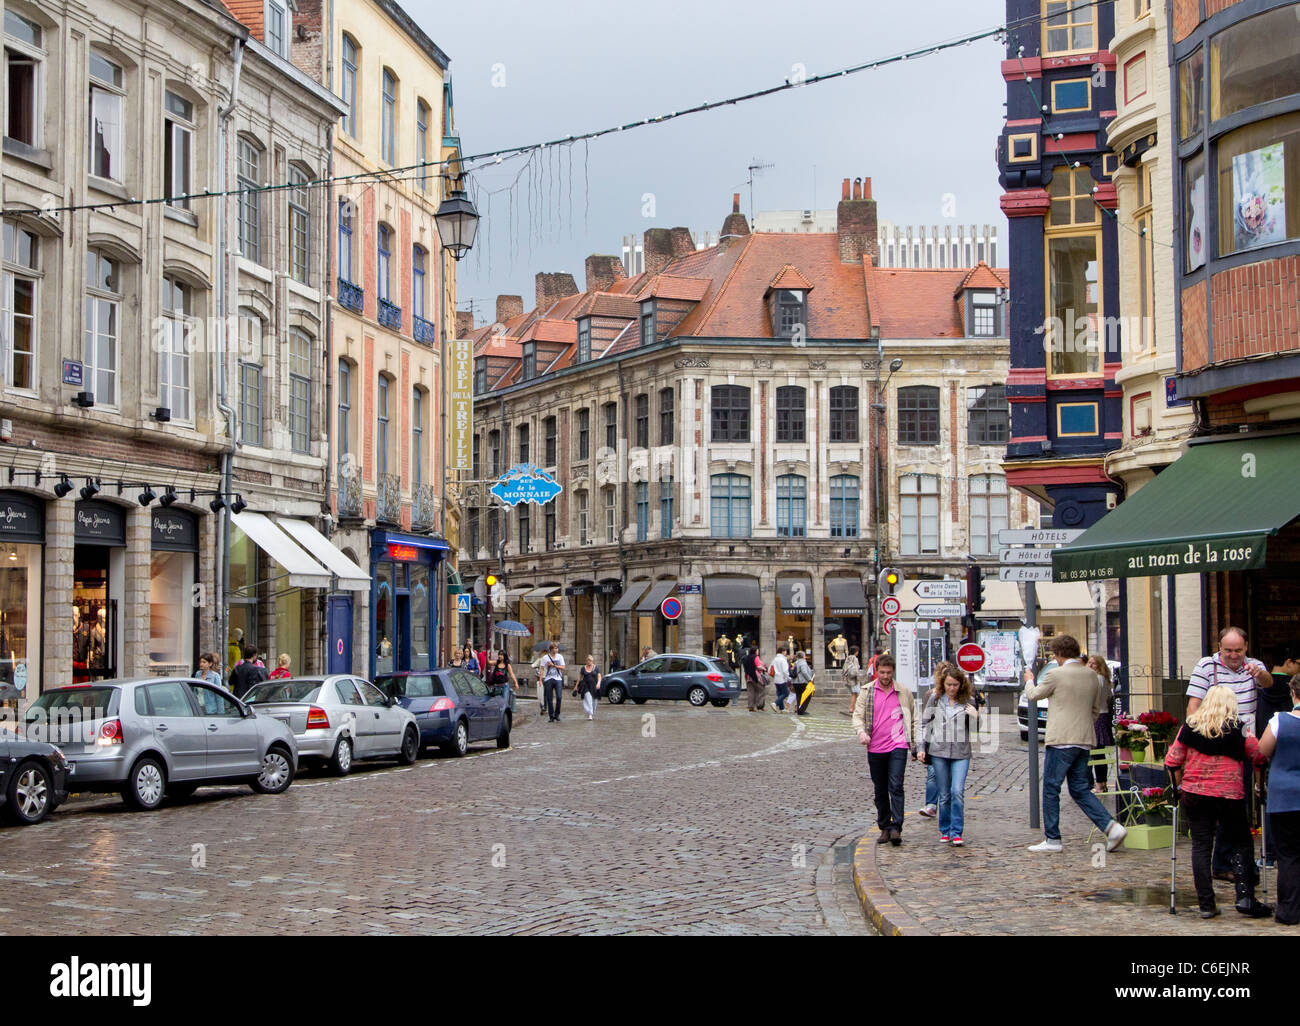 A rainy day in the streets of Lille. Place du Lion d'Or, Old Lille. Nord-Pas de Calais, France Stock Photo